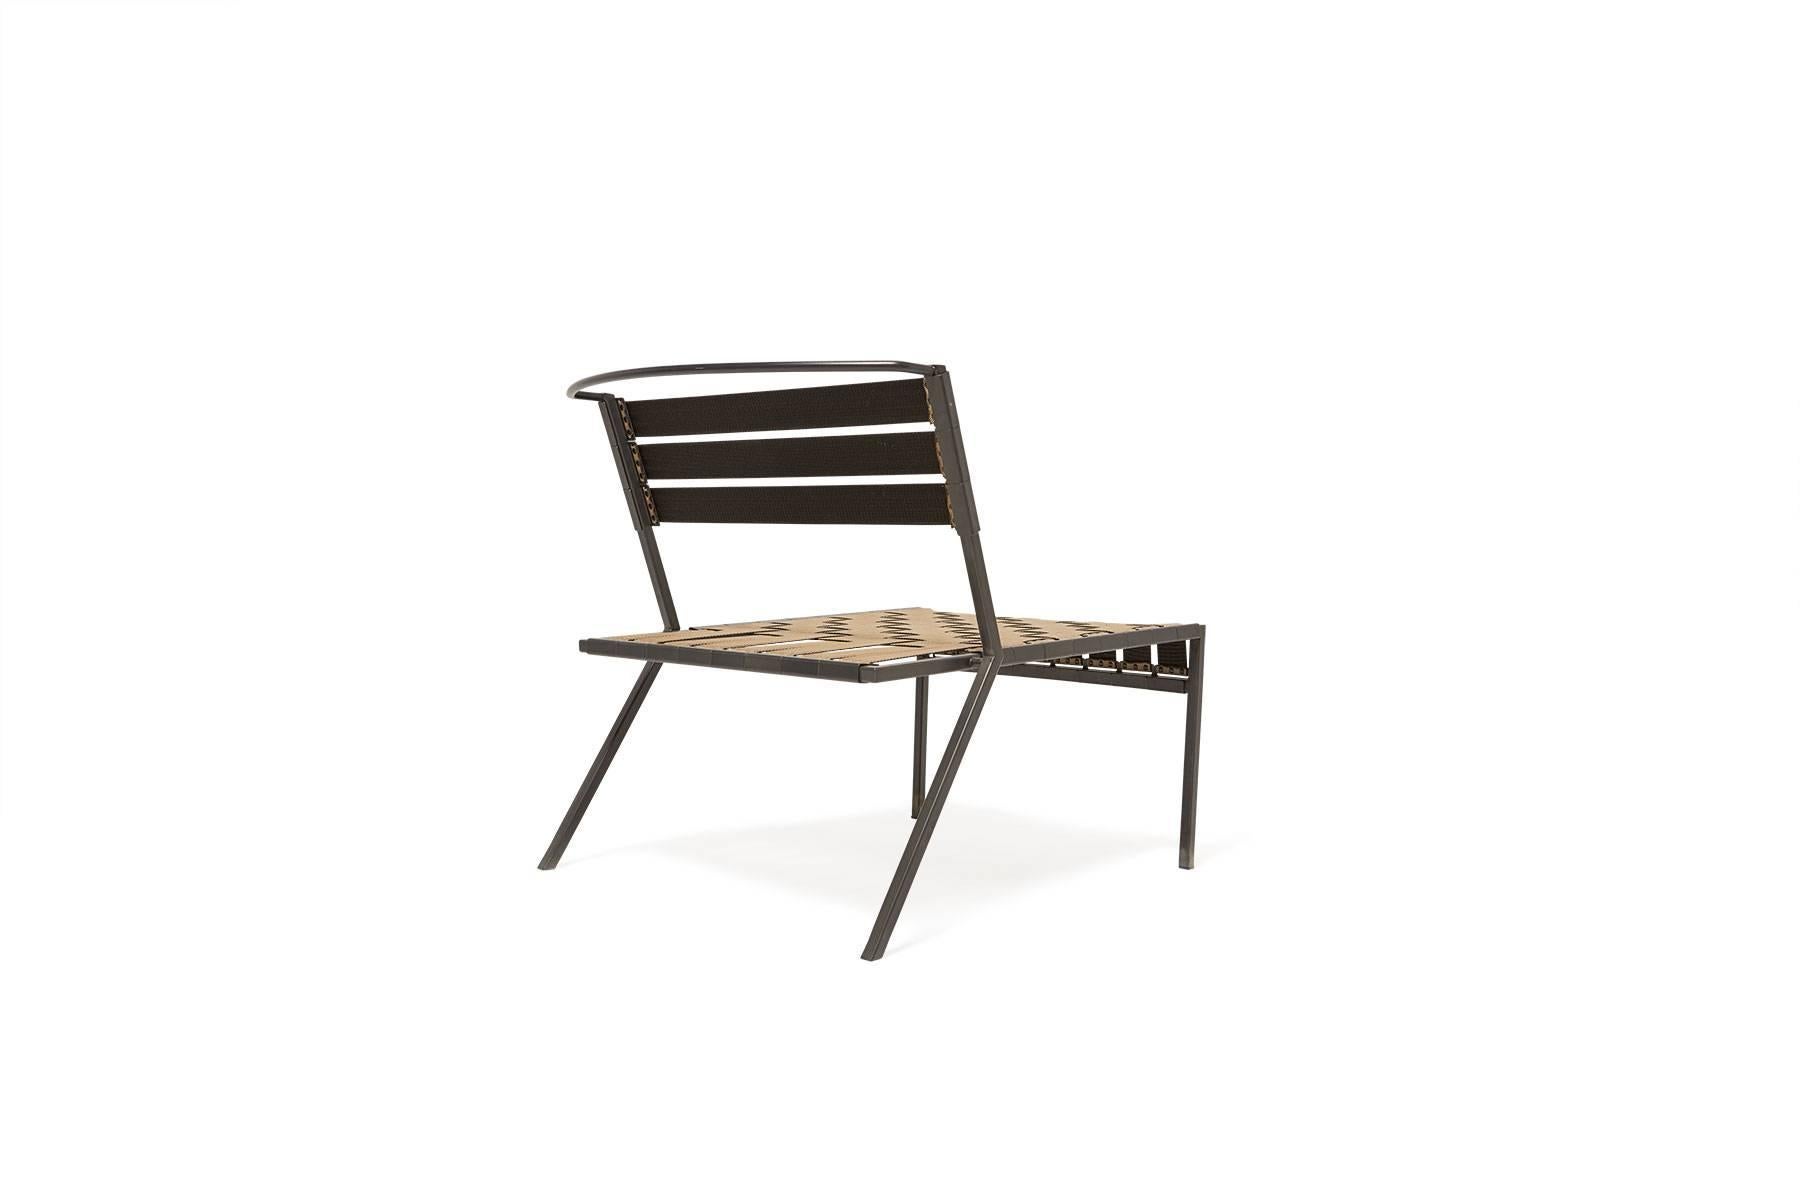 American Tan & Charcoal Outdoor Lounge Chair For Sale